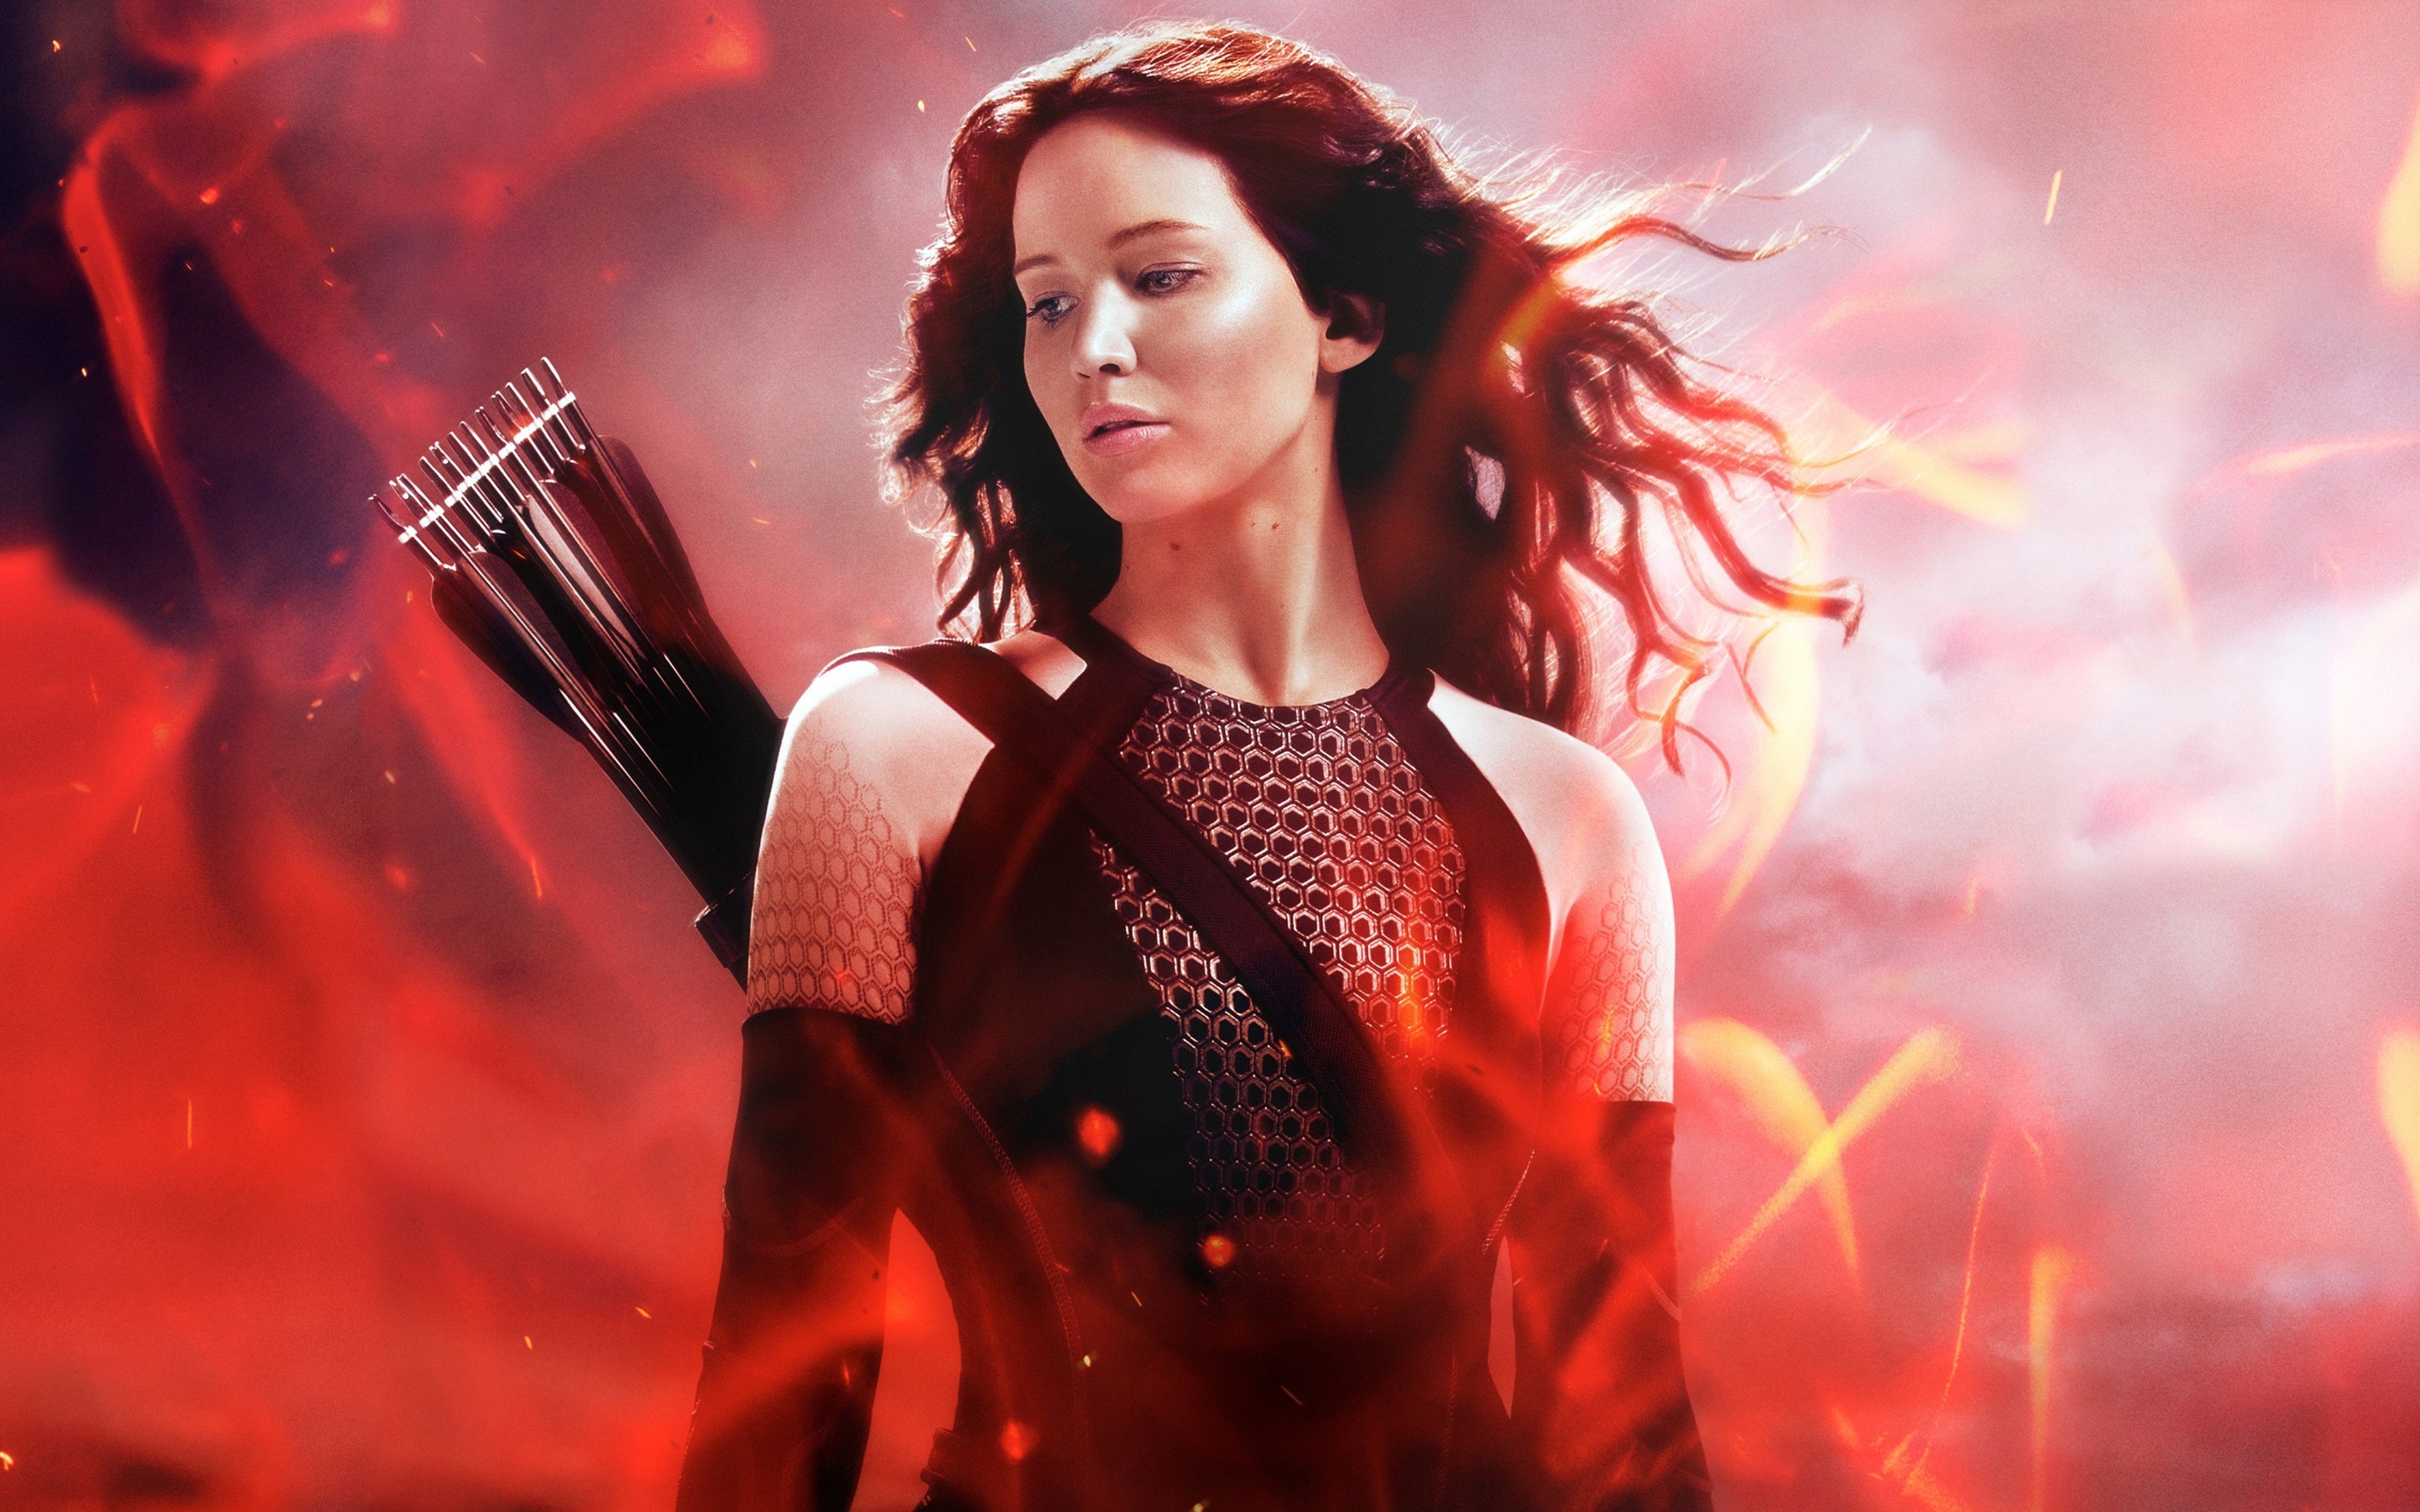 katniss, In, The, Hunger, Games, Catching, Fire, 4000x2500, Jennifer, Lawrence Wallpaper